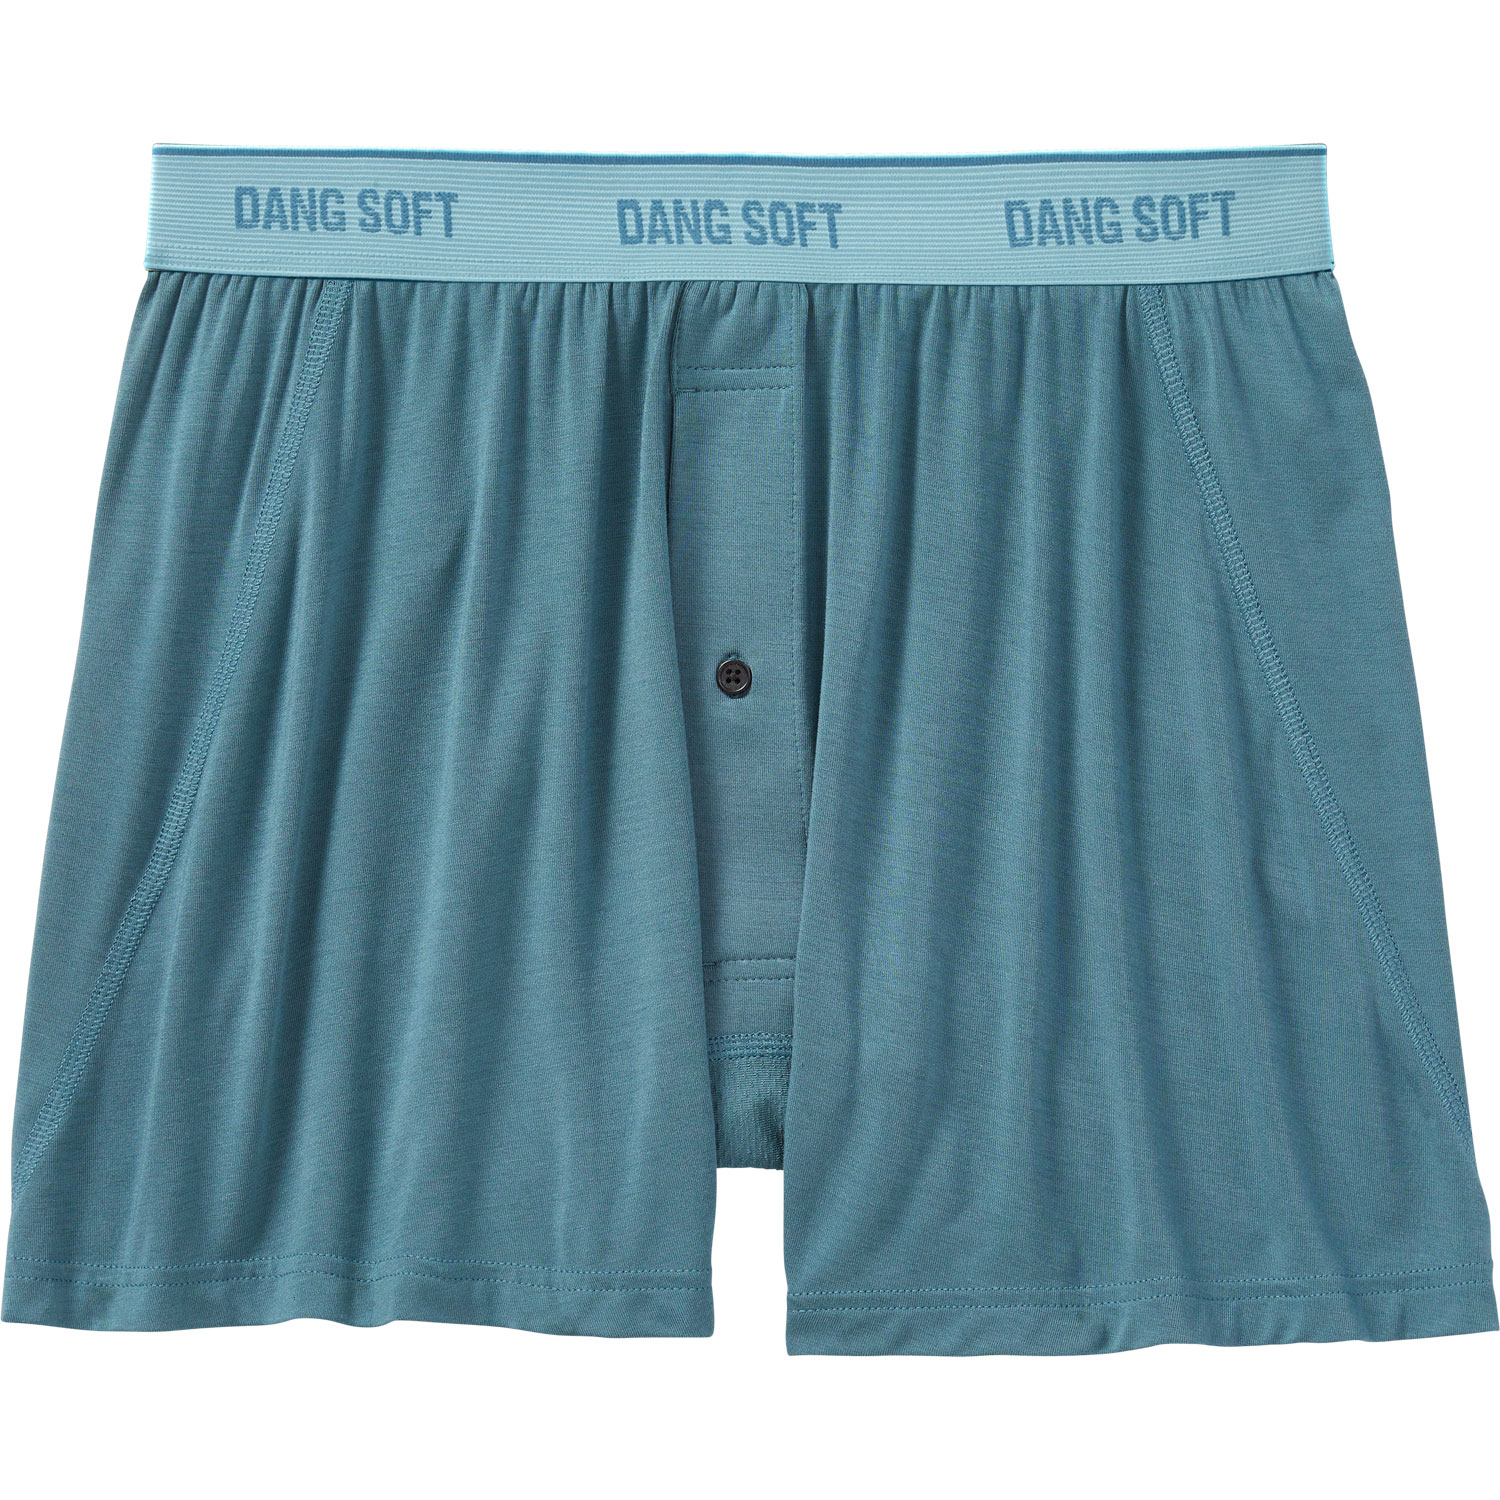 NEW Duluth Dang Soft Pattern Boxer Briefs Light Blue Small (S) (28-30)